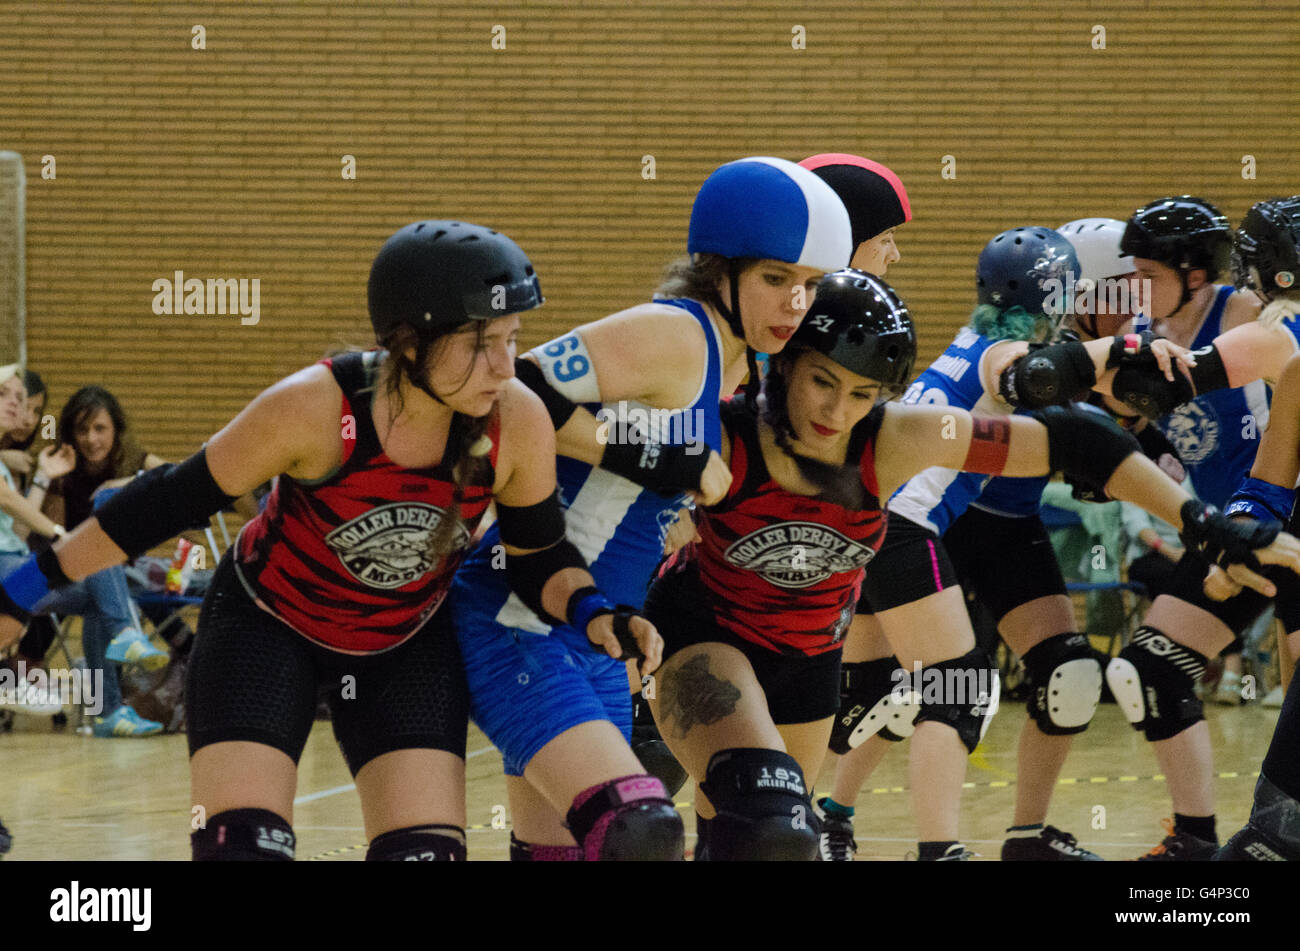 Madrid, Spain. 18th June, 2016. Players of Roller Derby Madrid A blocking  the pivot of Paris Rollergirls, #69 Race Kelly. Credit: Valentin  Sama-Rojo/Alamy Live News Stock Photo - Alamy